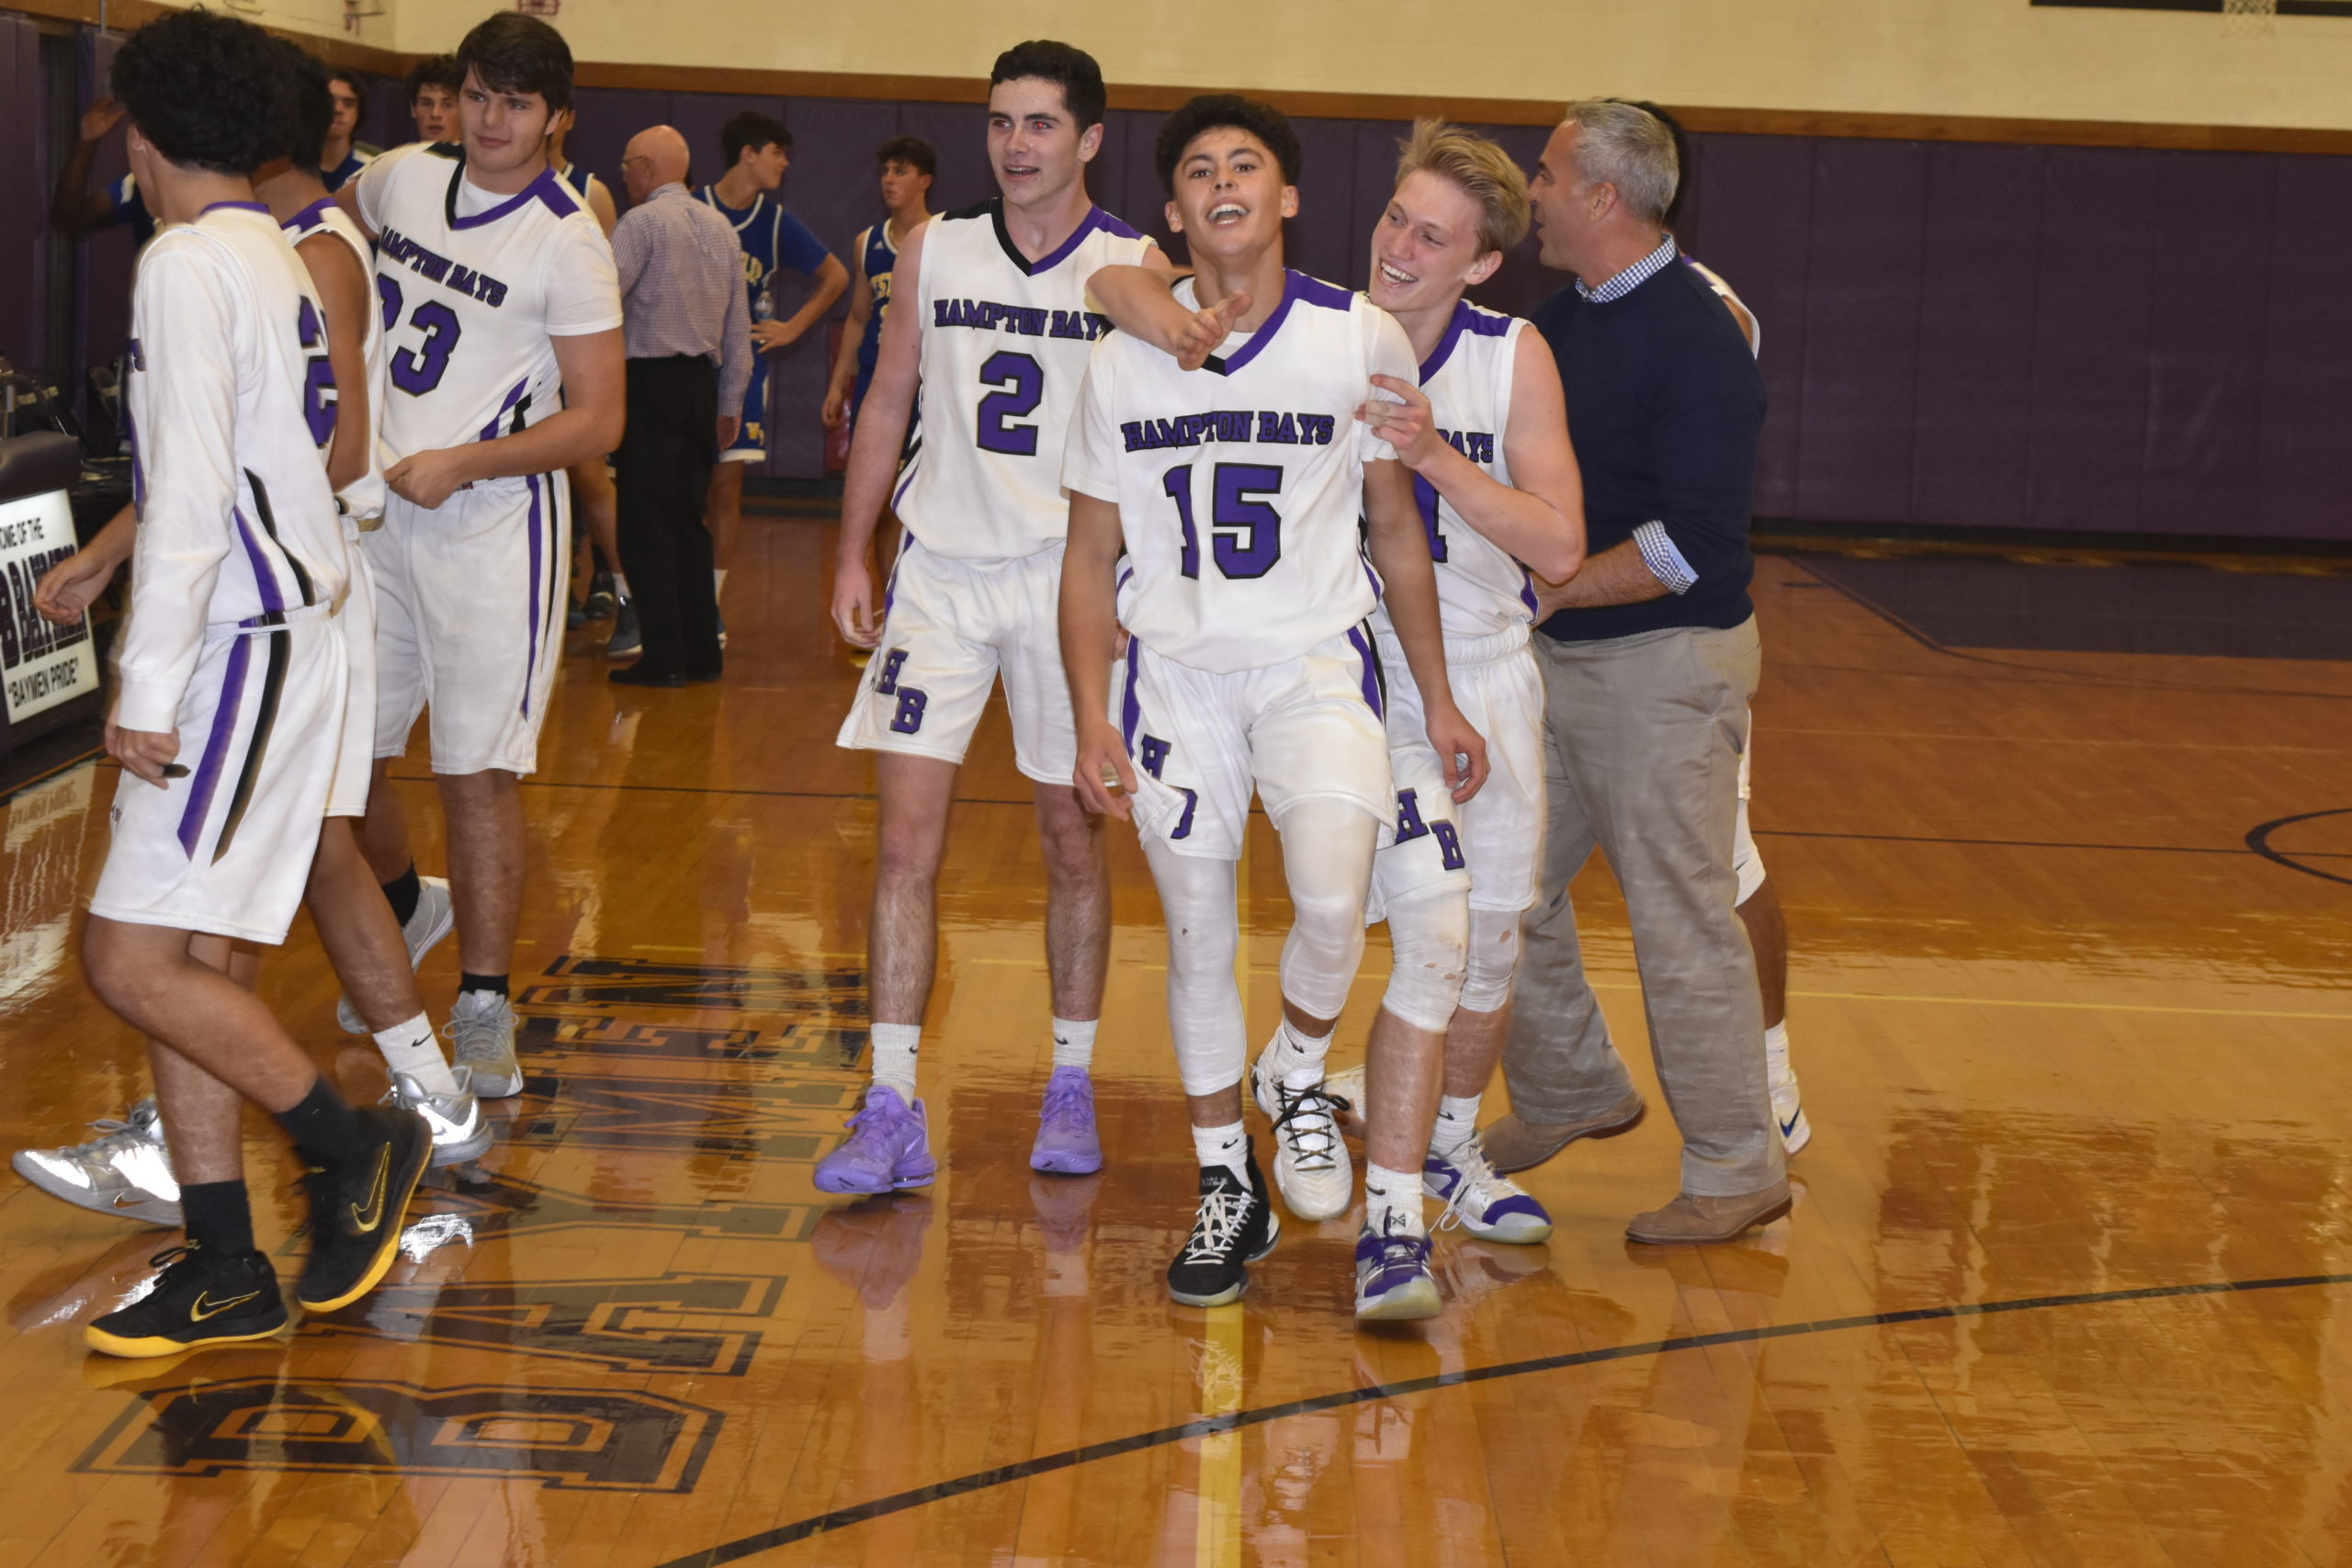 Lucas Brown and other teammates congratulate Steven Mora after his half-court buzzer beater led to a 54-51 victory over West Islip on Friday night.